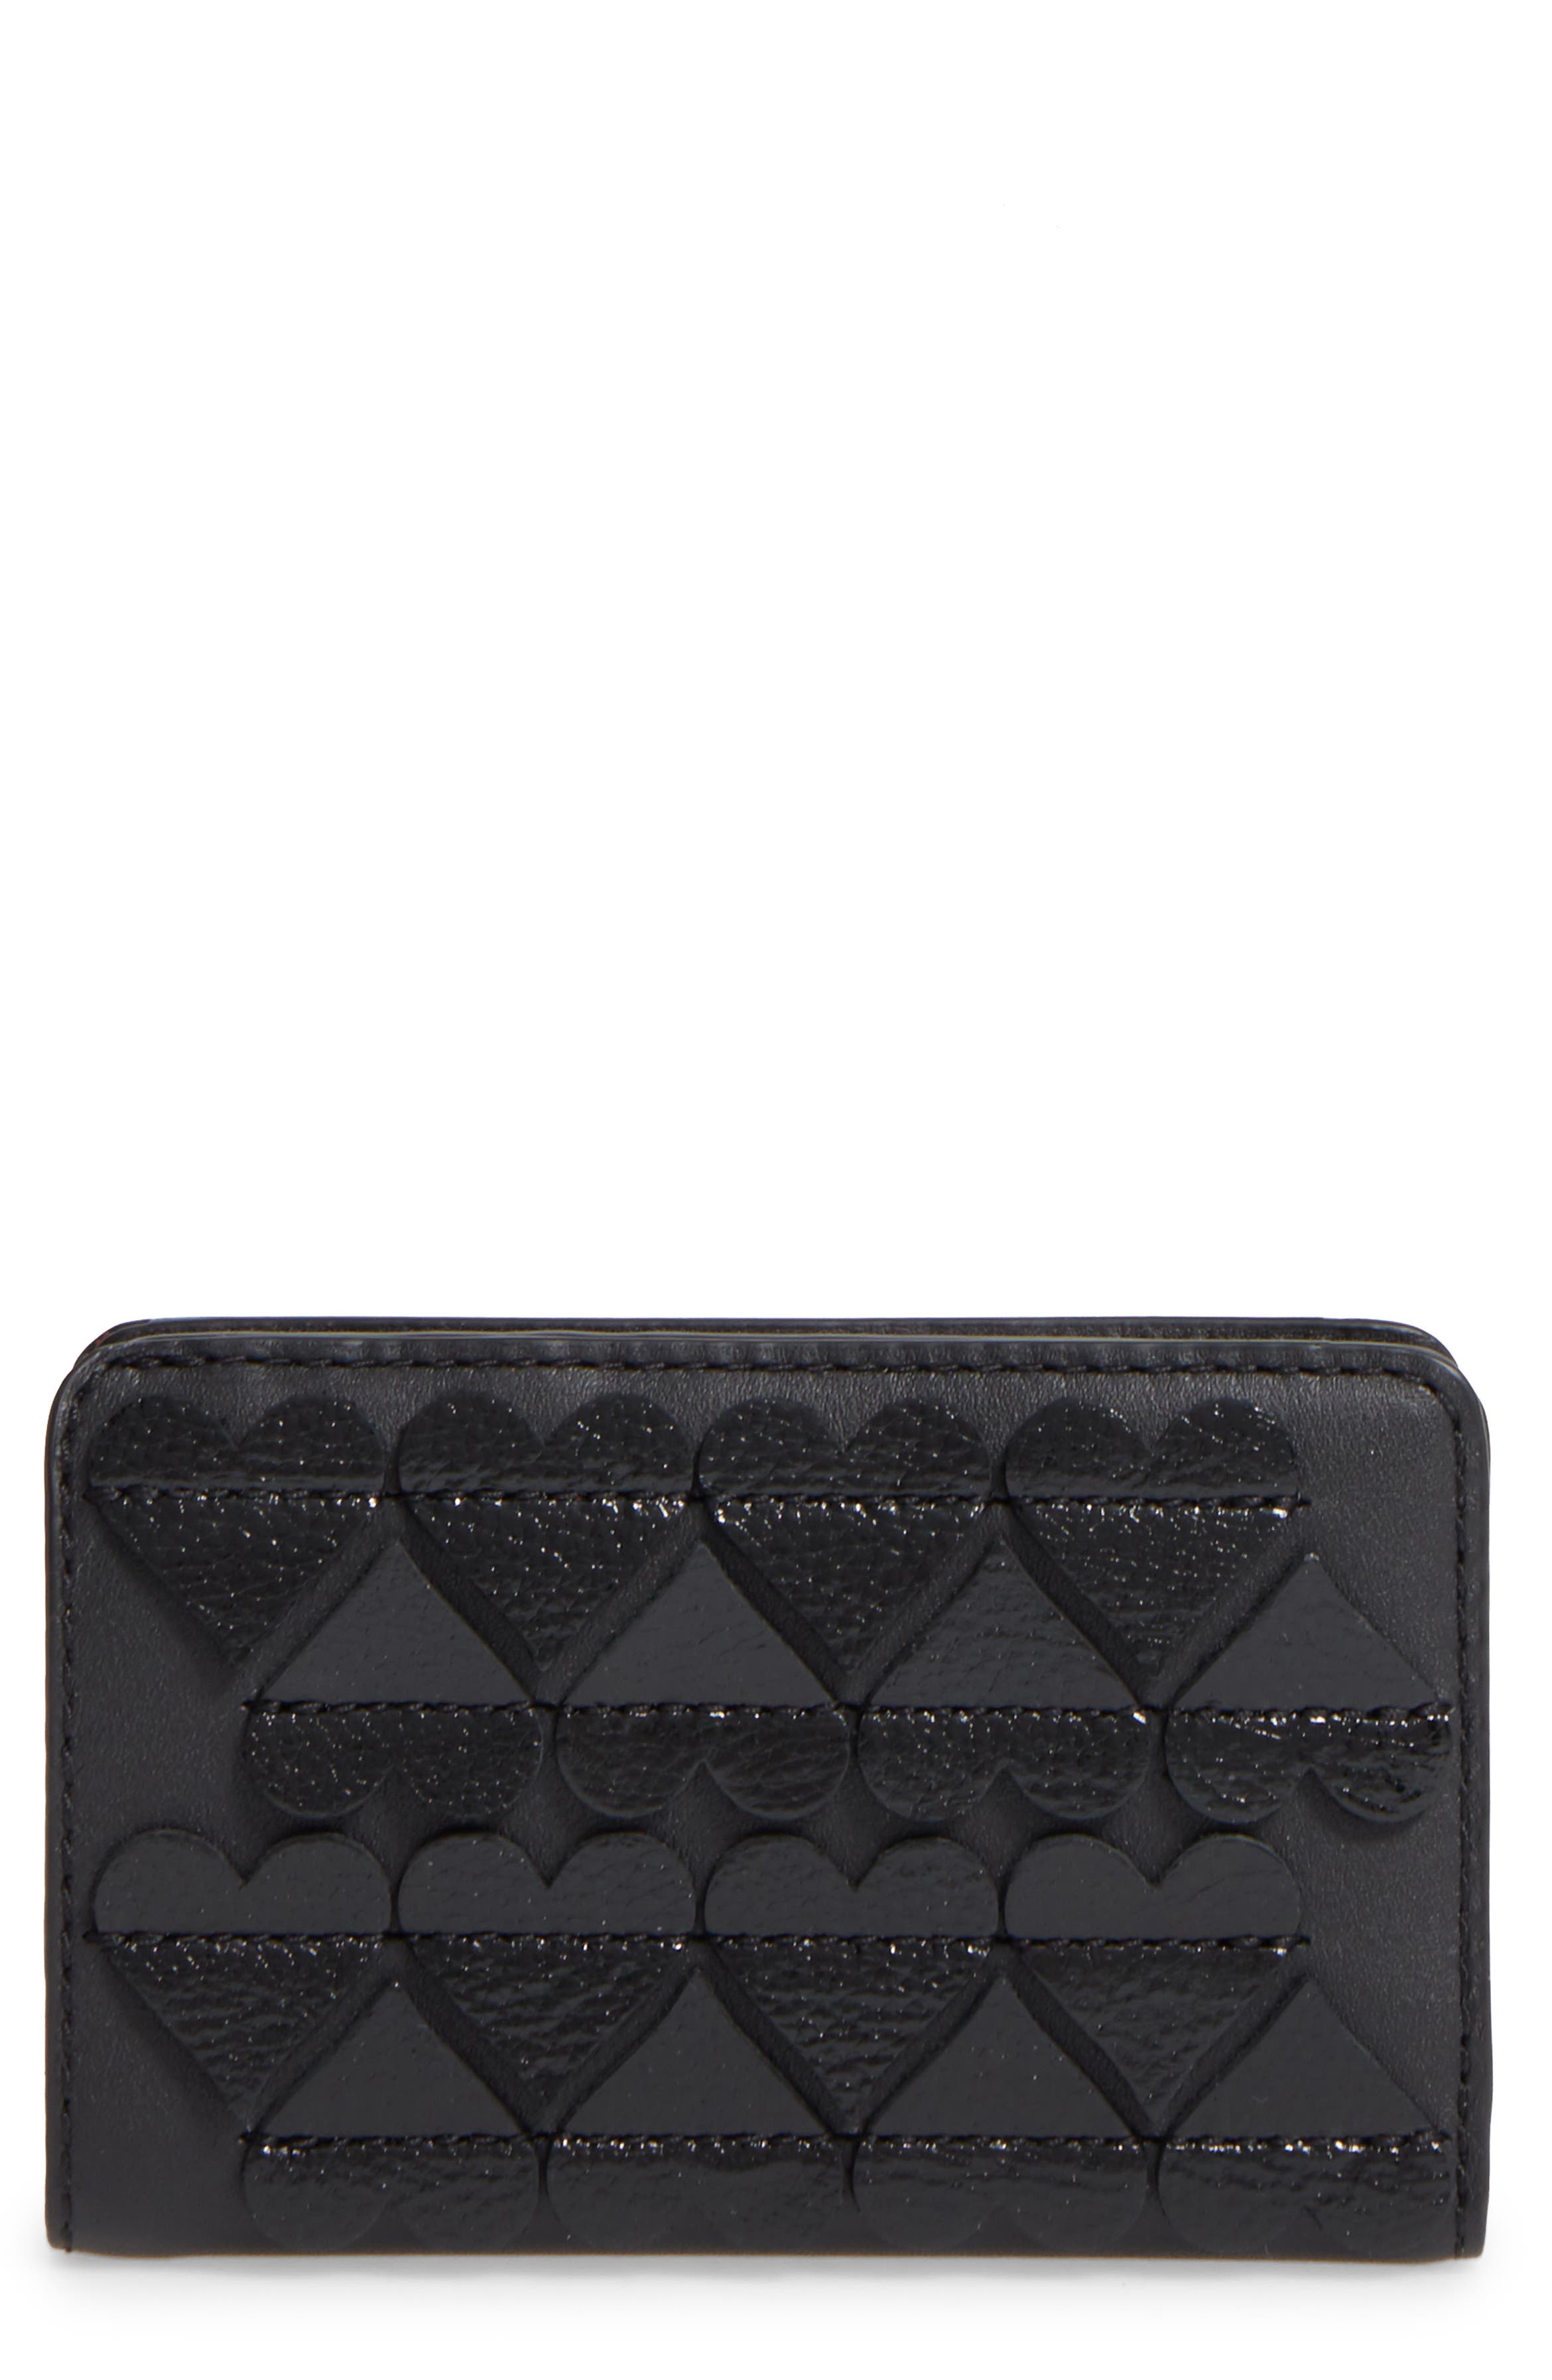 MARC JACOBS Embossed Heart Compact Leather Wallet | Nordstrom